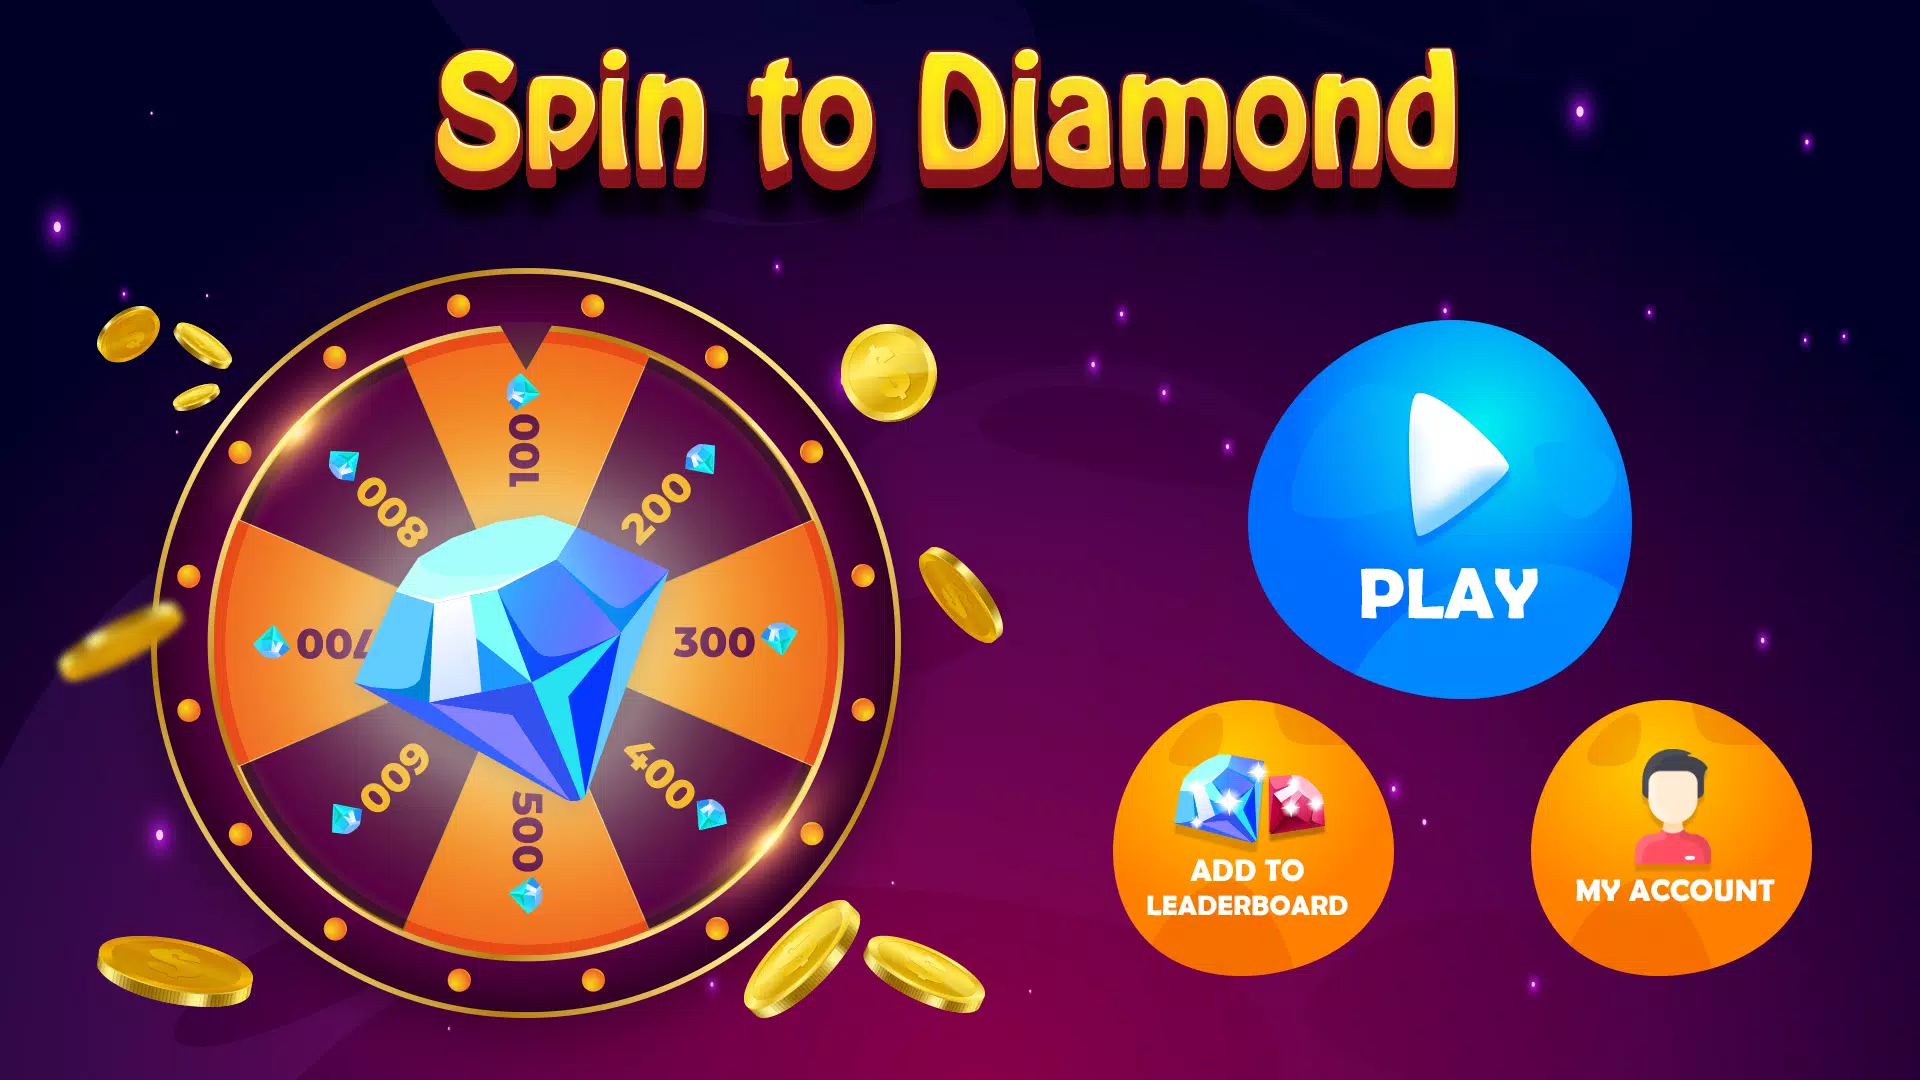 Lucky Spin. To Spin. COINPOKER Cosmic Spin Table. Spin by oxxo.